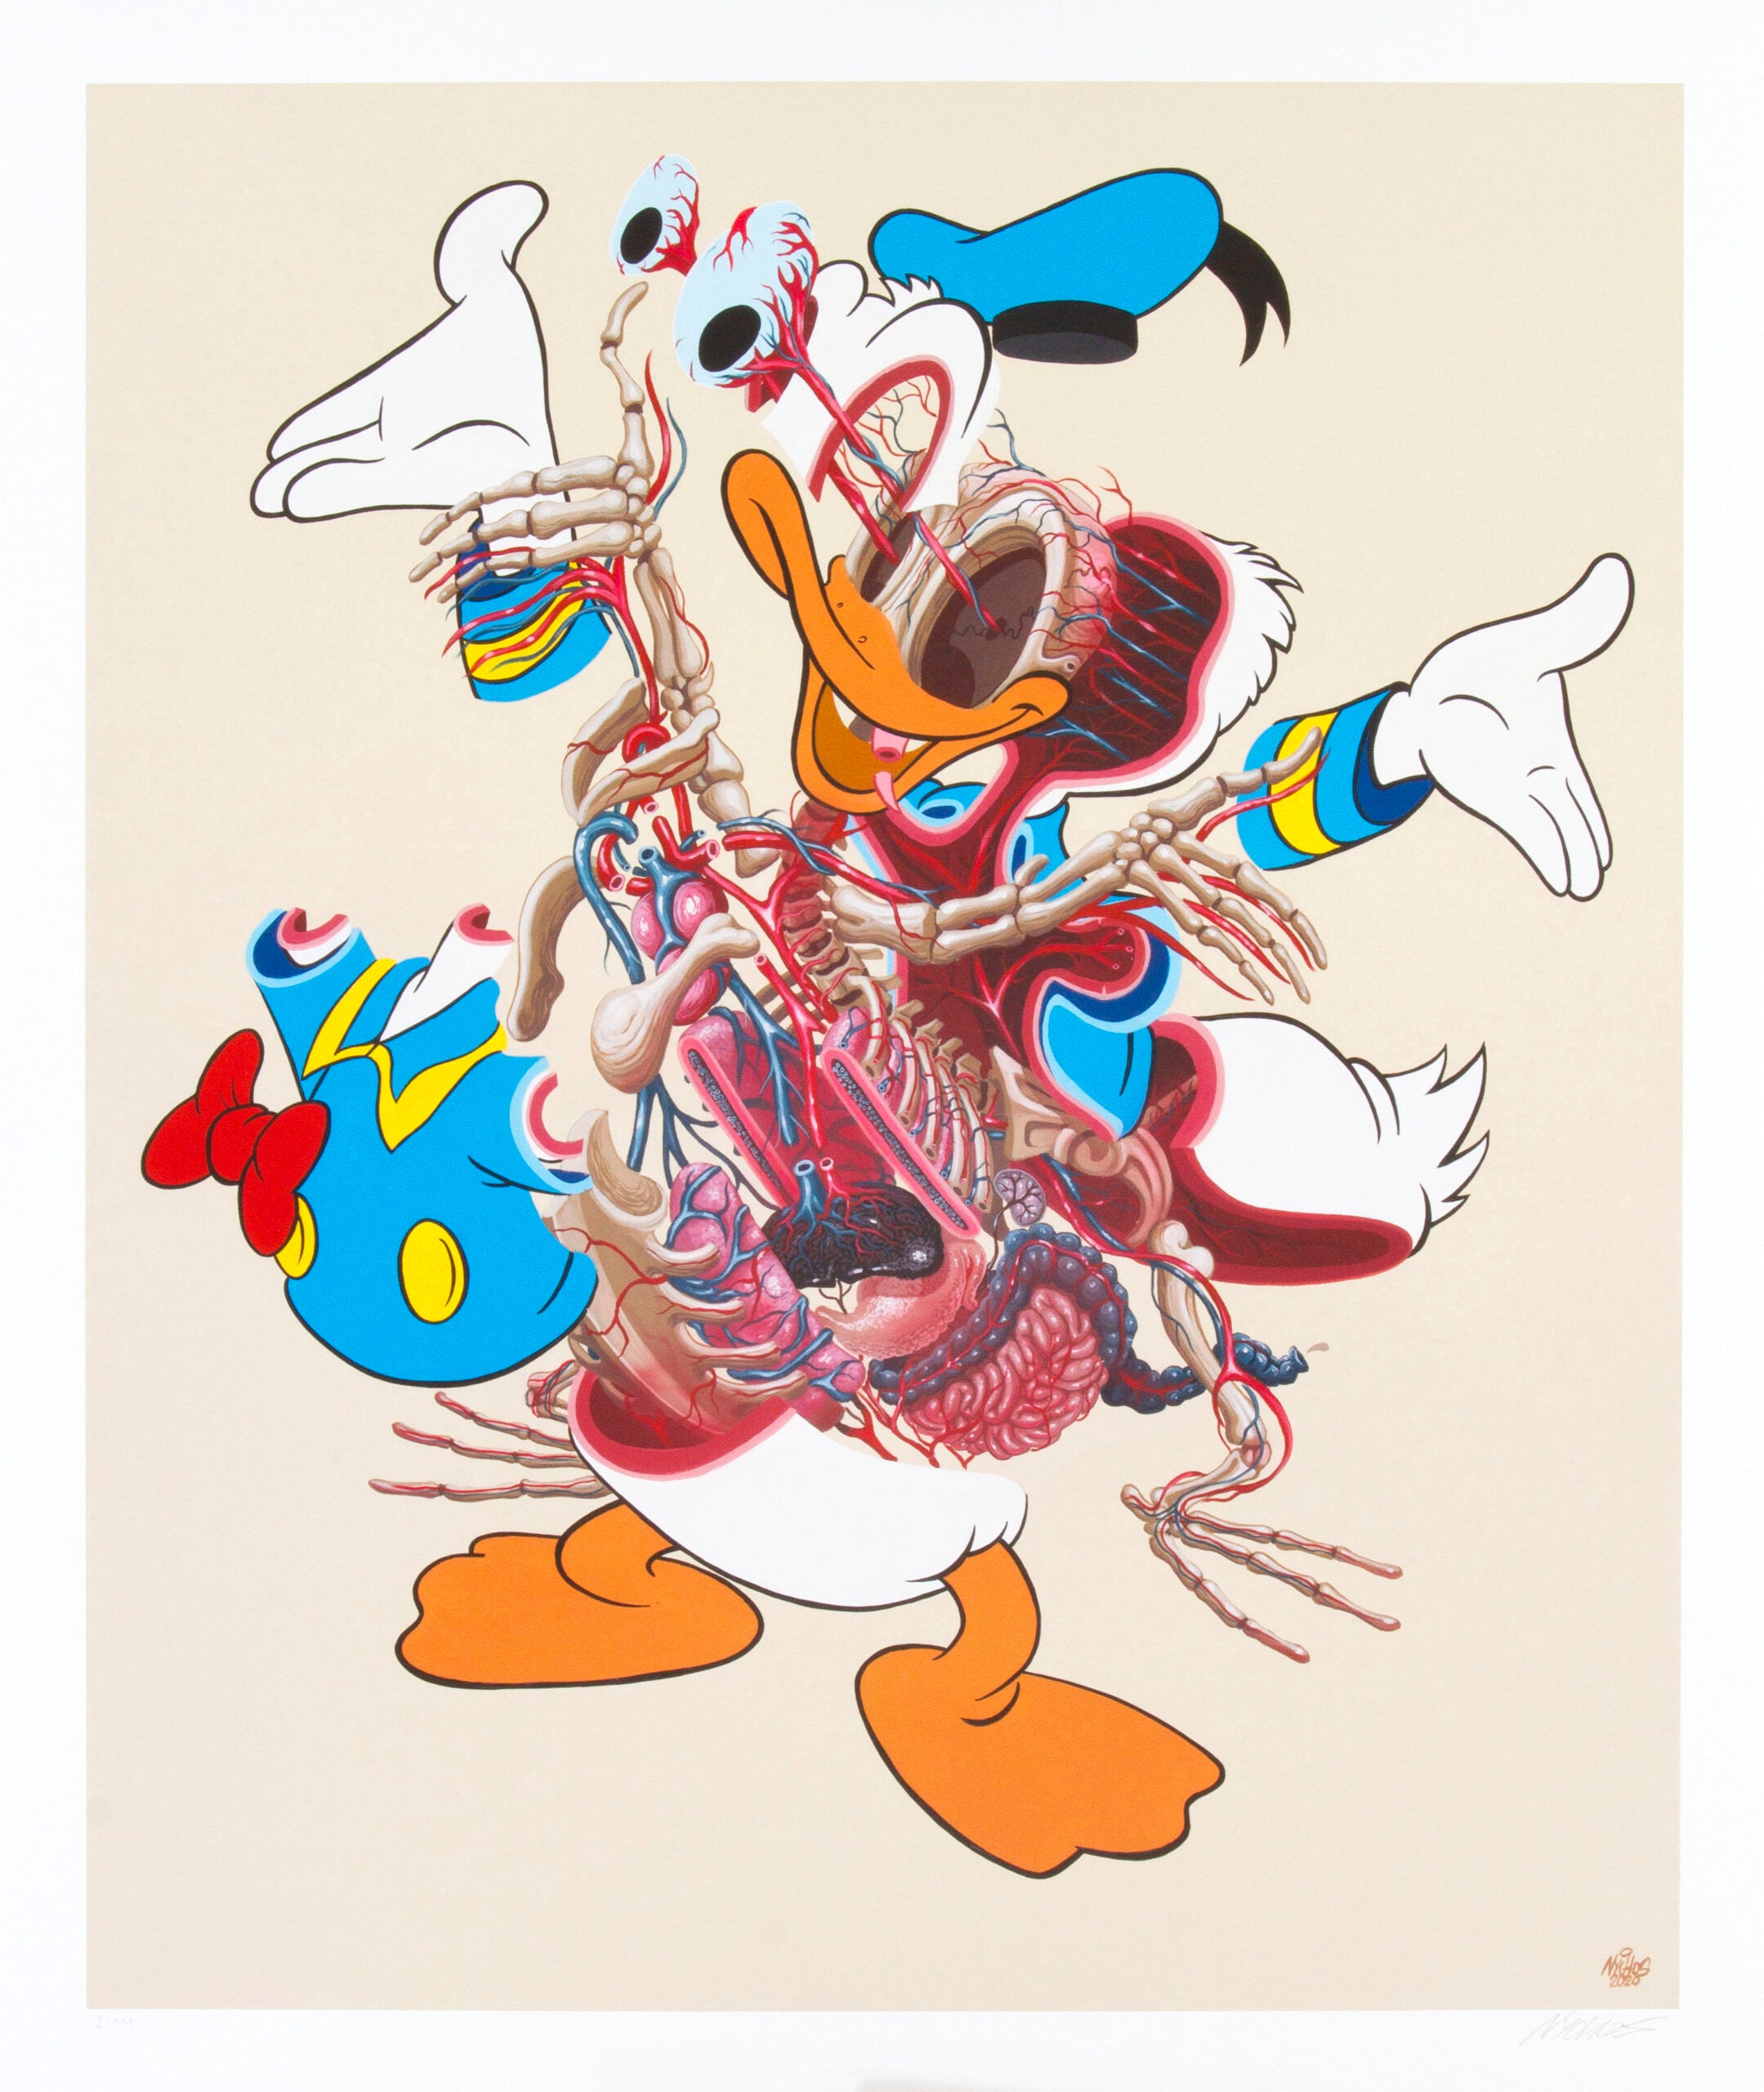 Dissection of Donald Duck